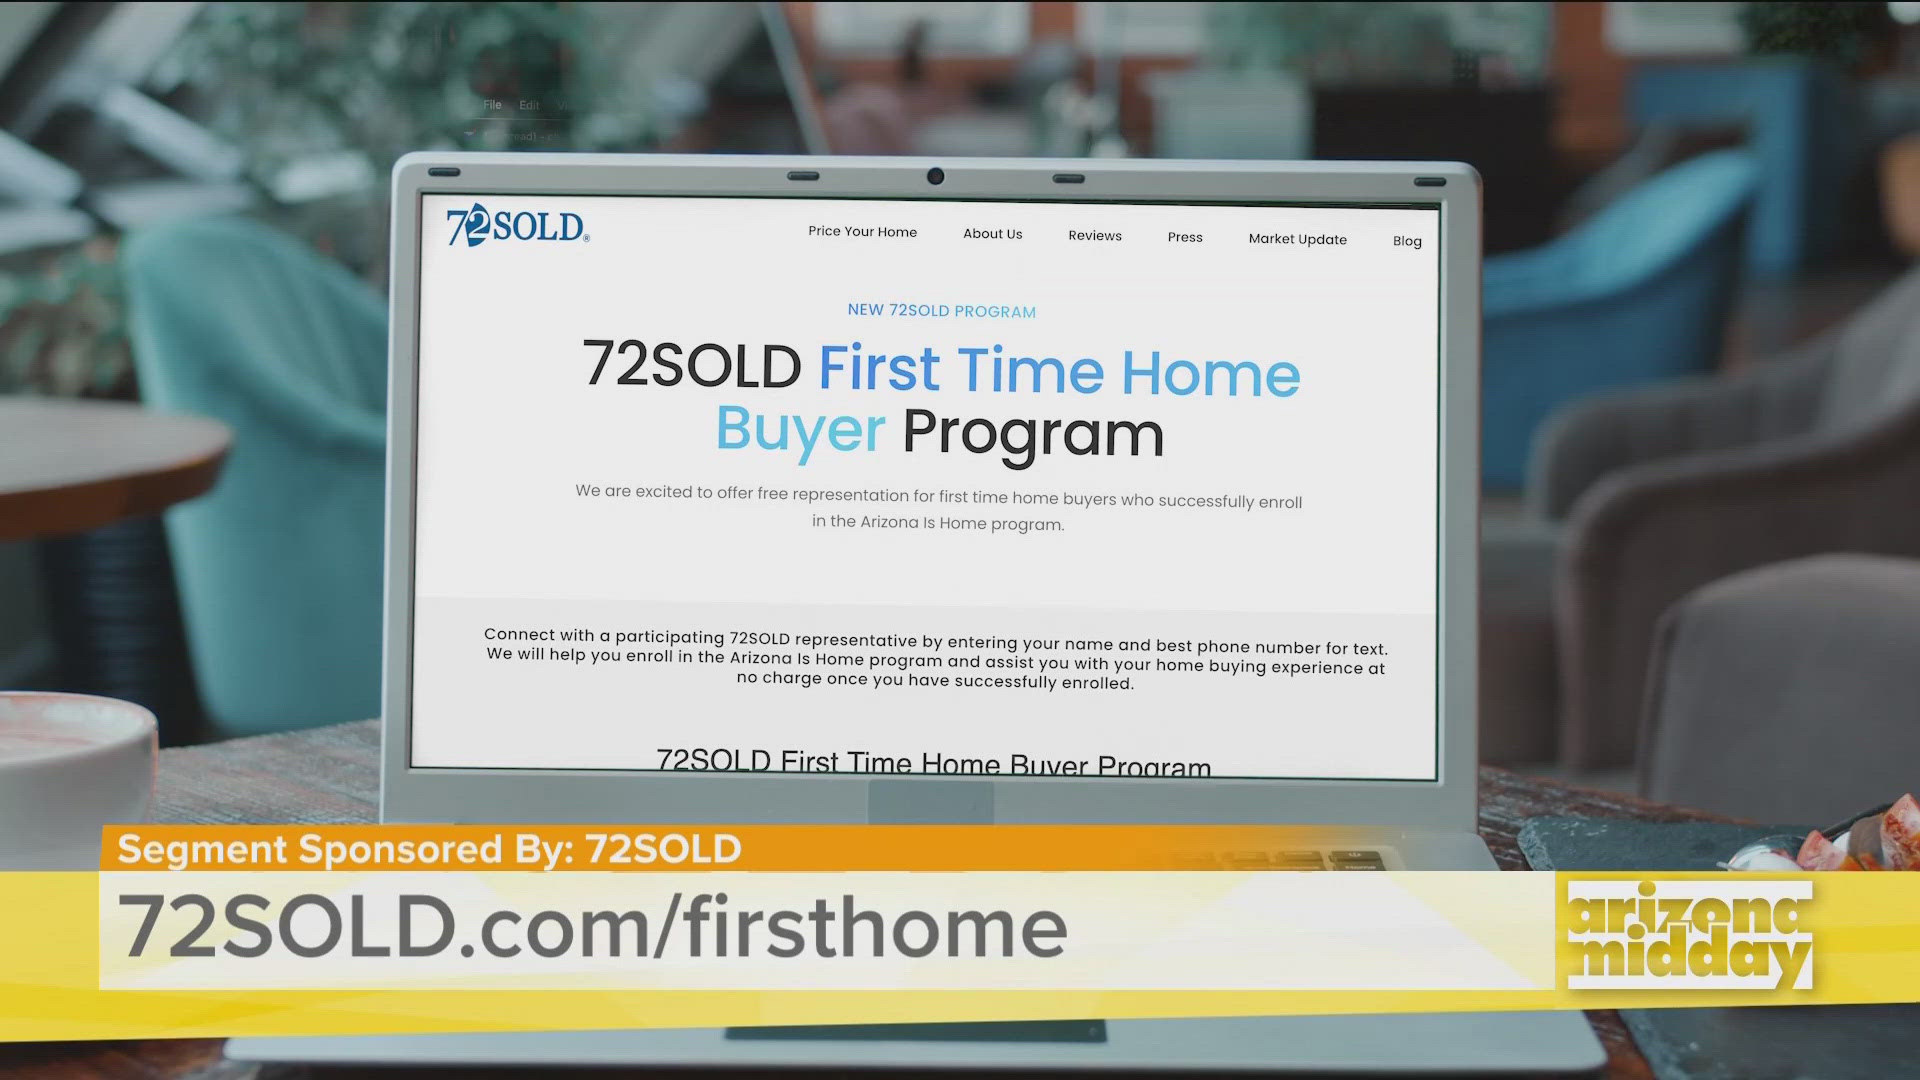 Martha Thompson with 72SOLD talks about the two programs that helps qualifying first time home buyers get into their own house.